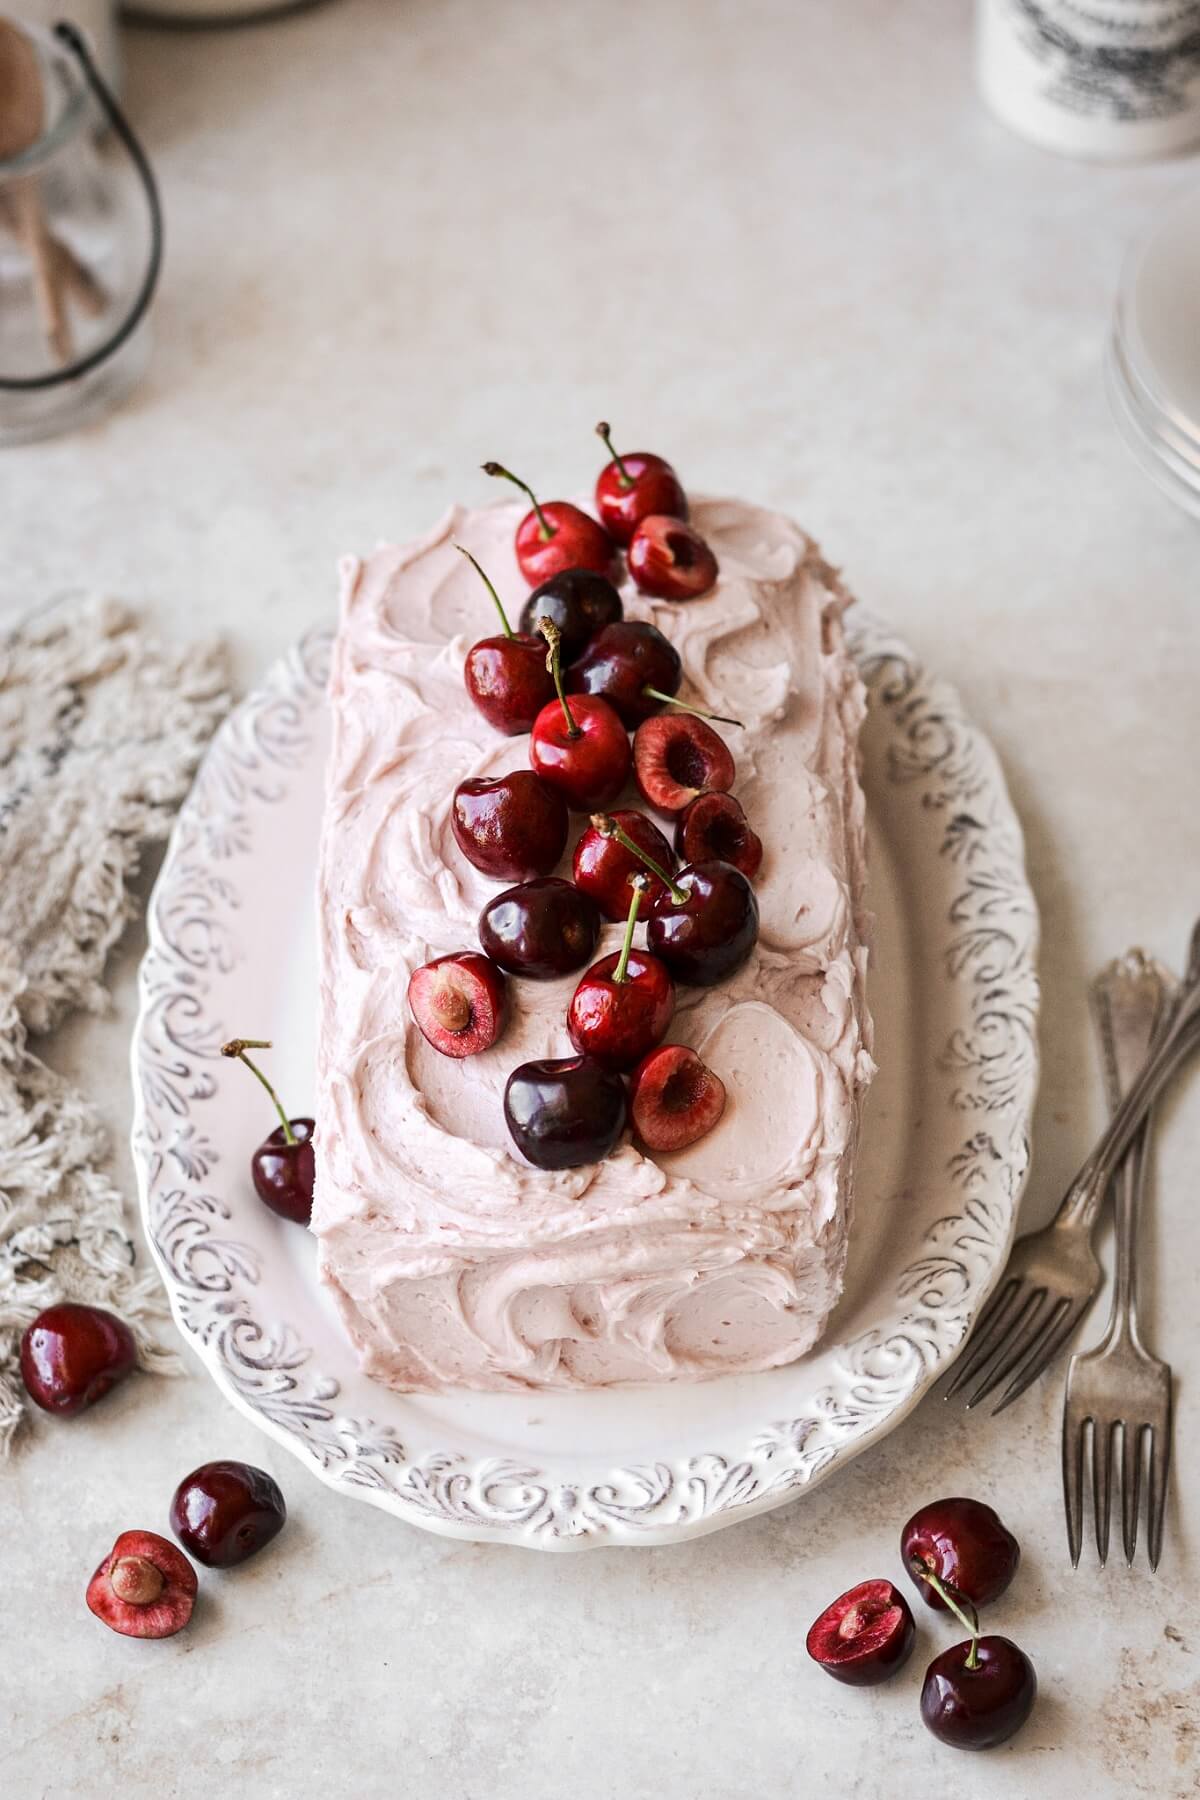 Cherries arranged on top of a pink frosted loaf cake.